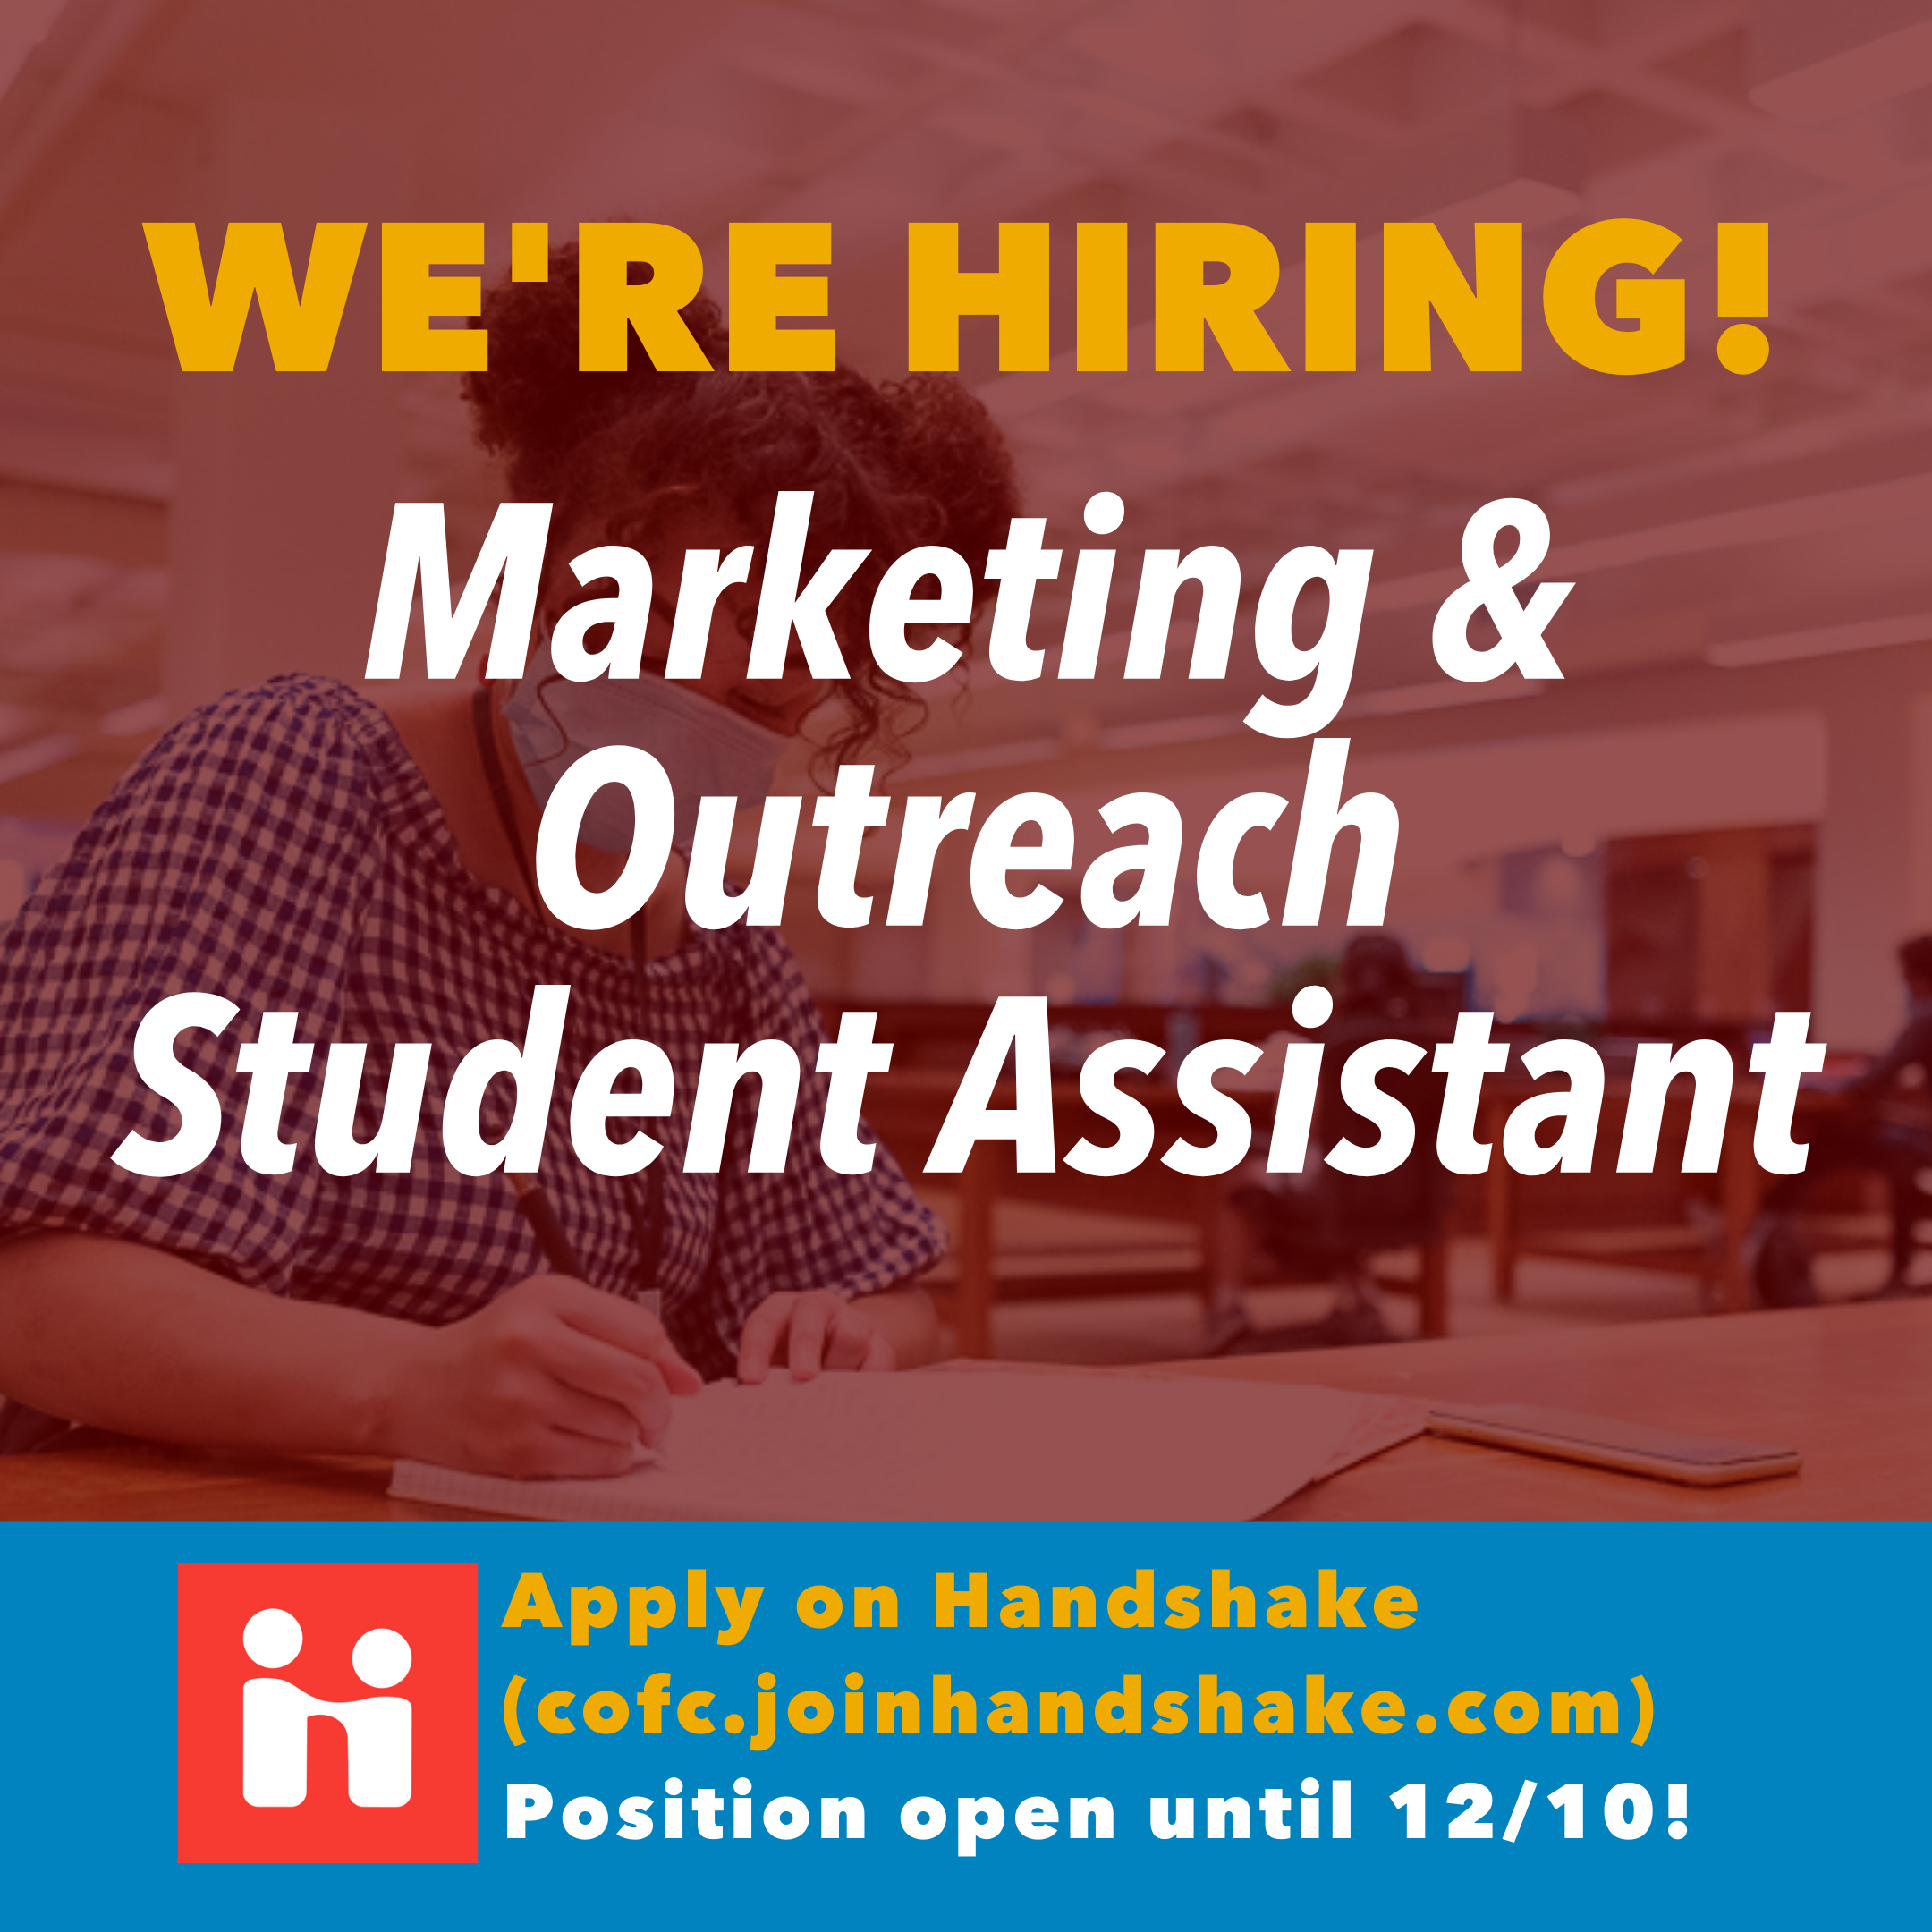 Marketing & Outreach Student Assistant Job Promo